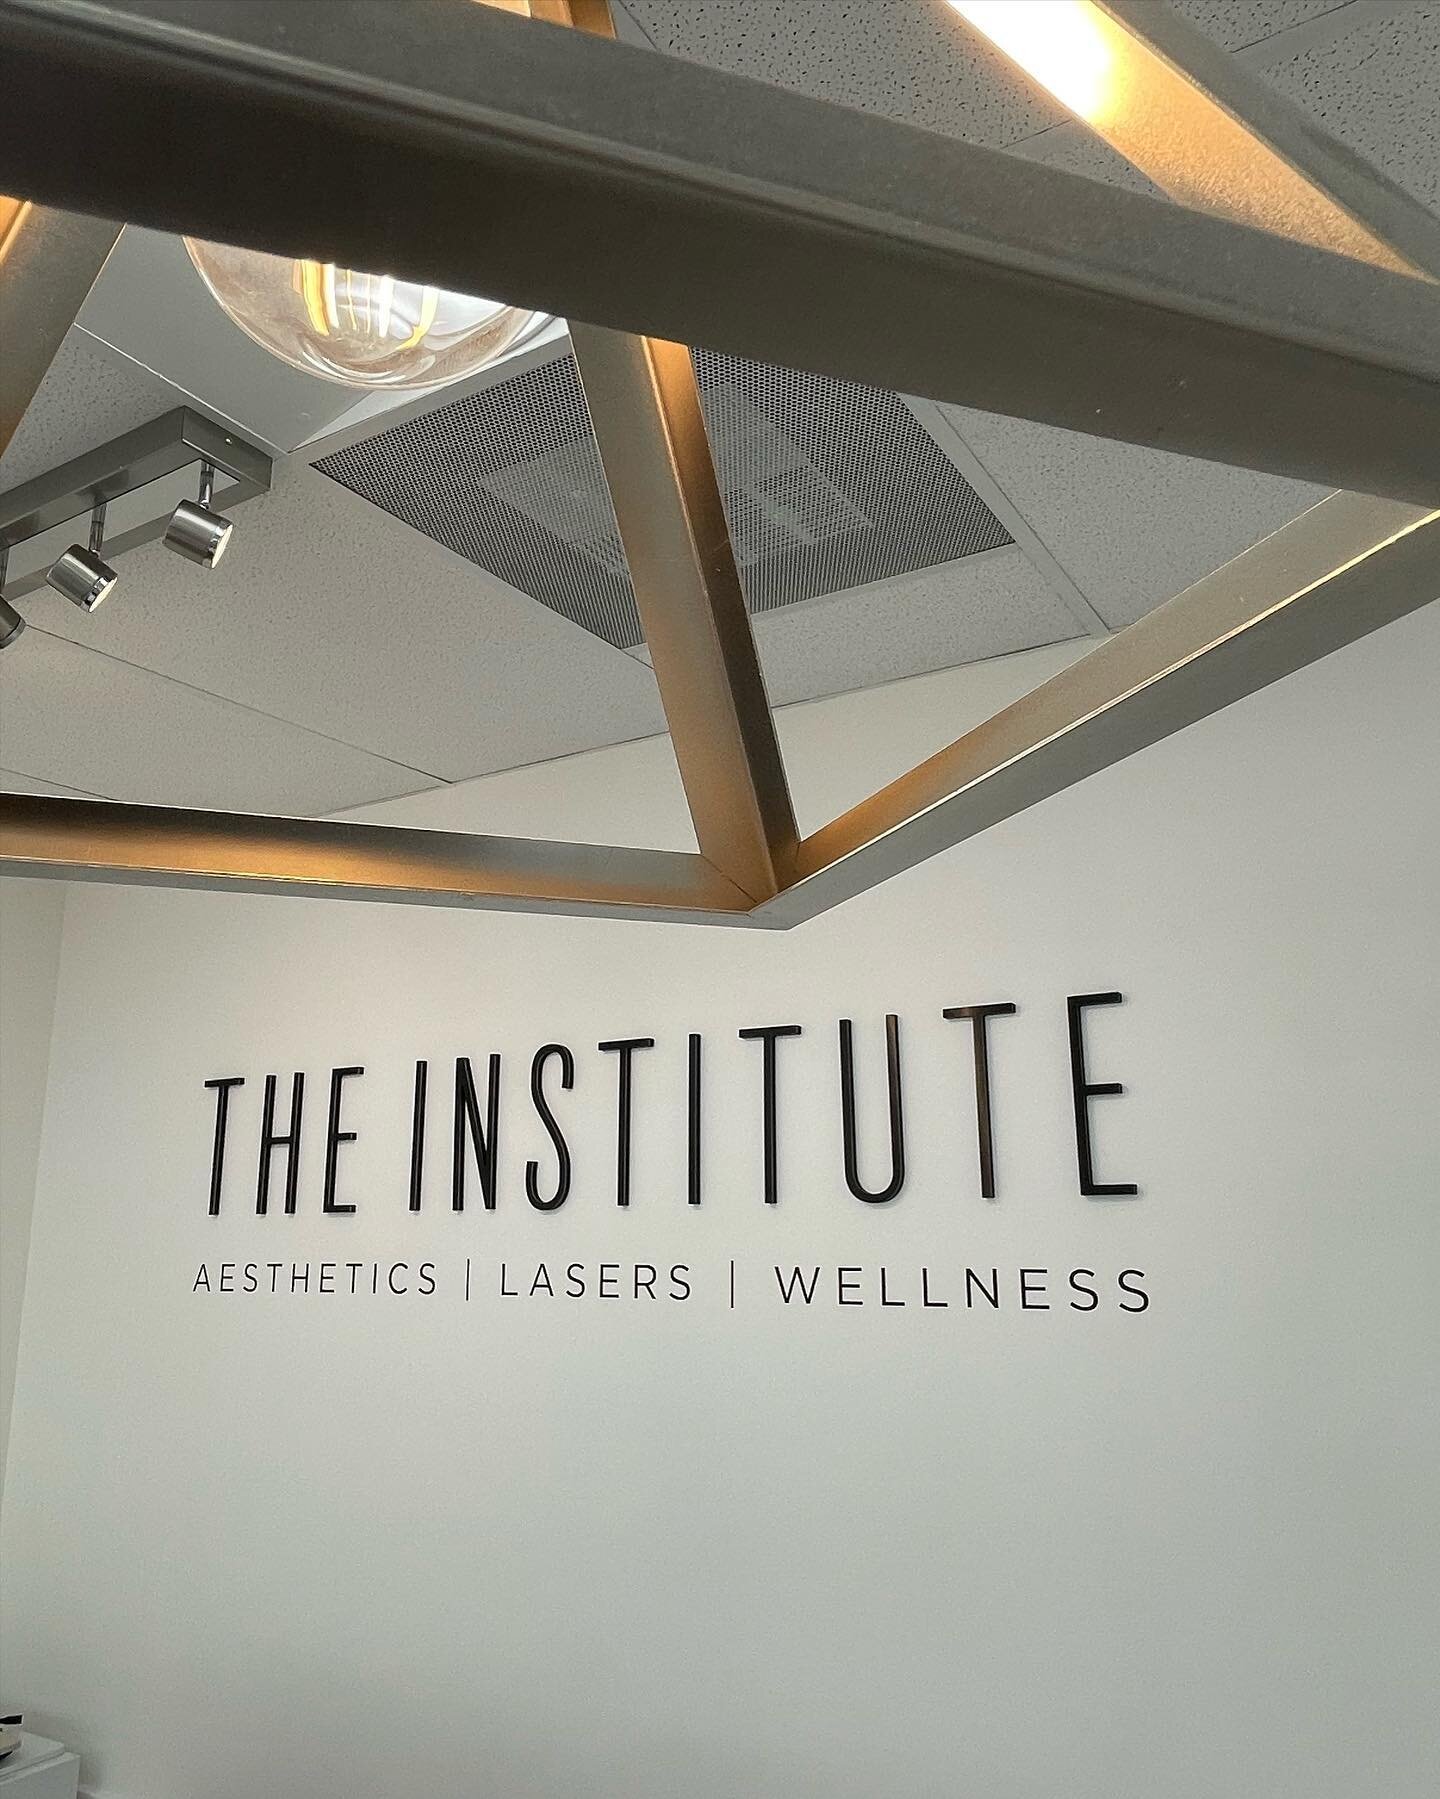 Branded @theinstitutemiami at their new location. Services we did for this project:  Custom Brushed Black Interior Sign, Exam Room Signs, 3M Dusted Store Front, 3M Impact/Security Film. #solguard #solguardindustries #theinstitute